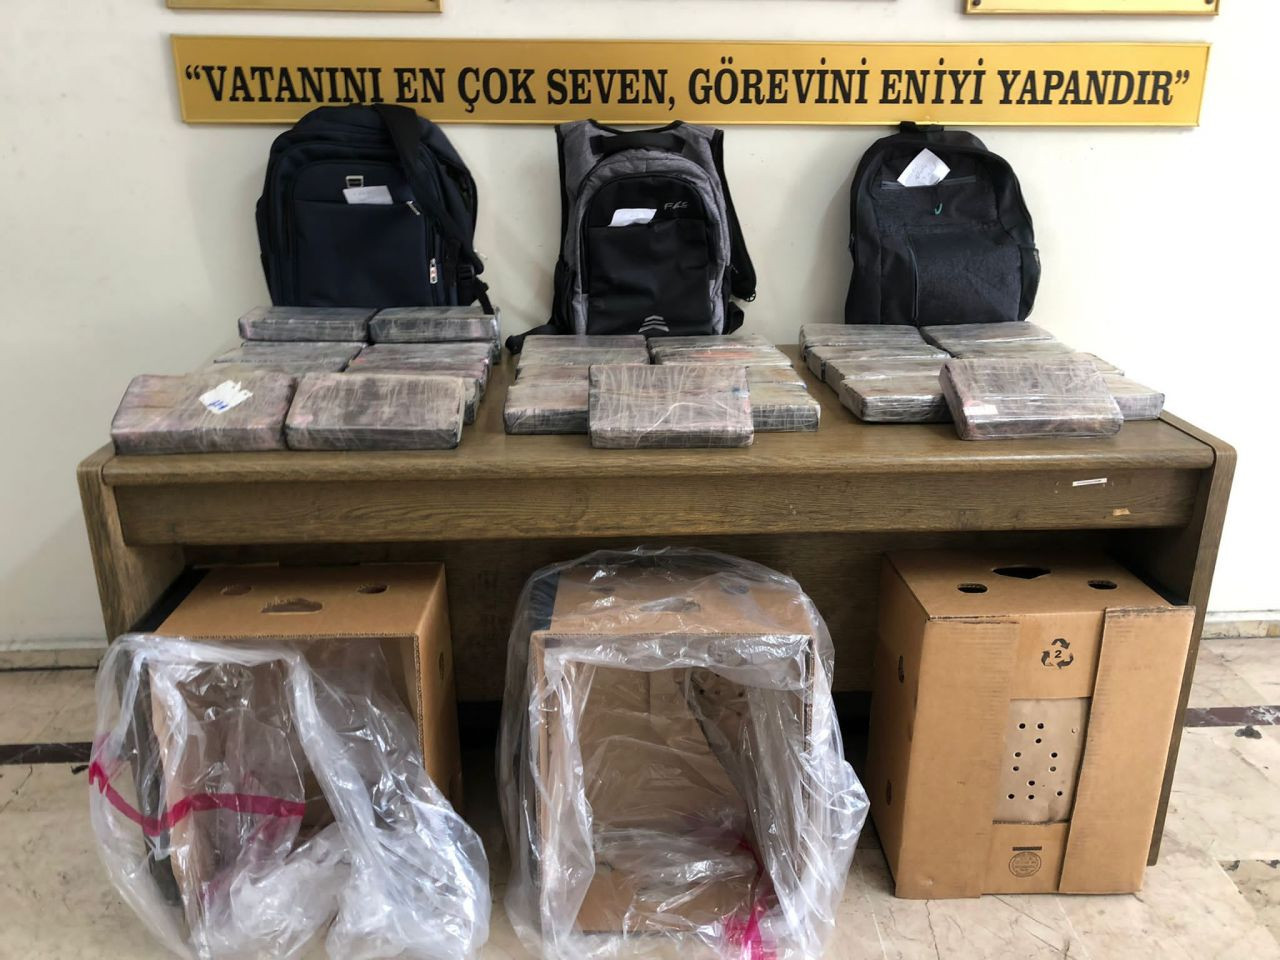 30 kilos of cocaine seized among banana crates in Mediterranean Mersin port - Page 5